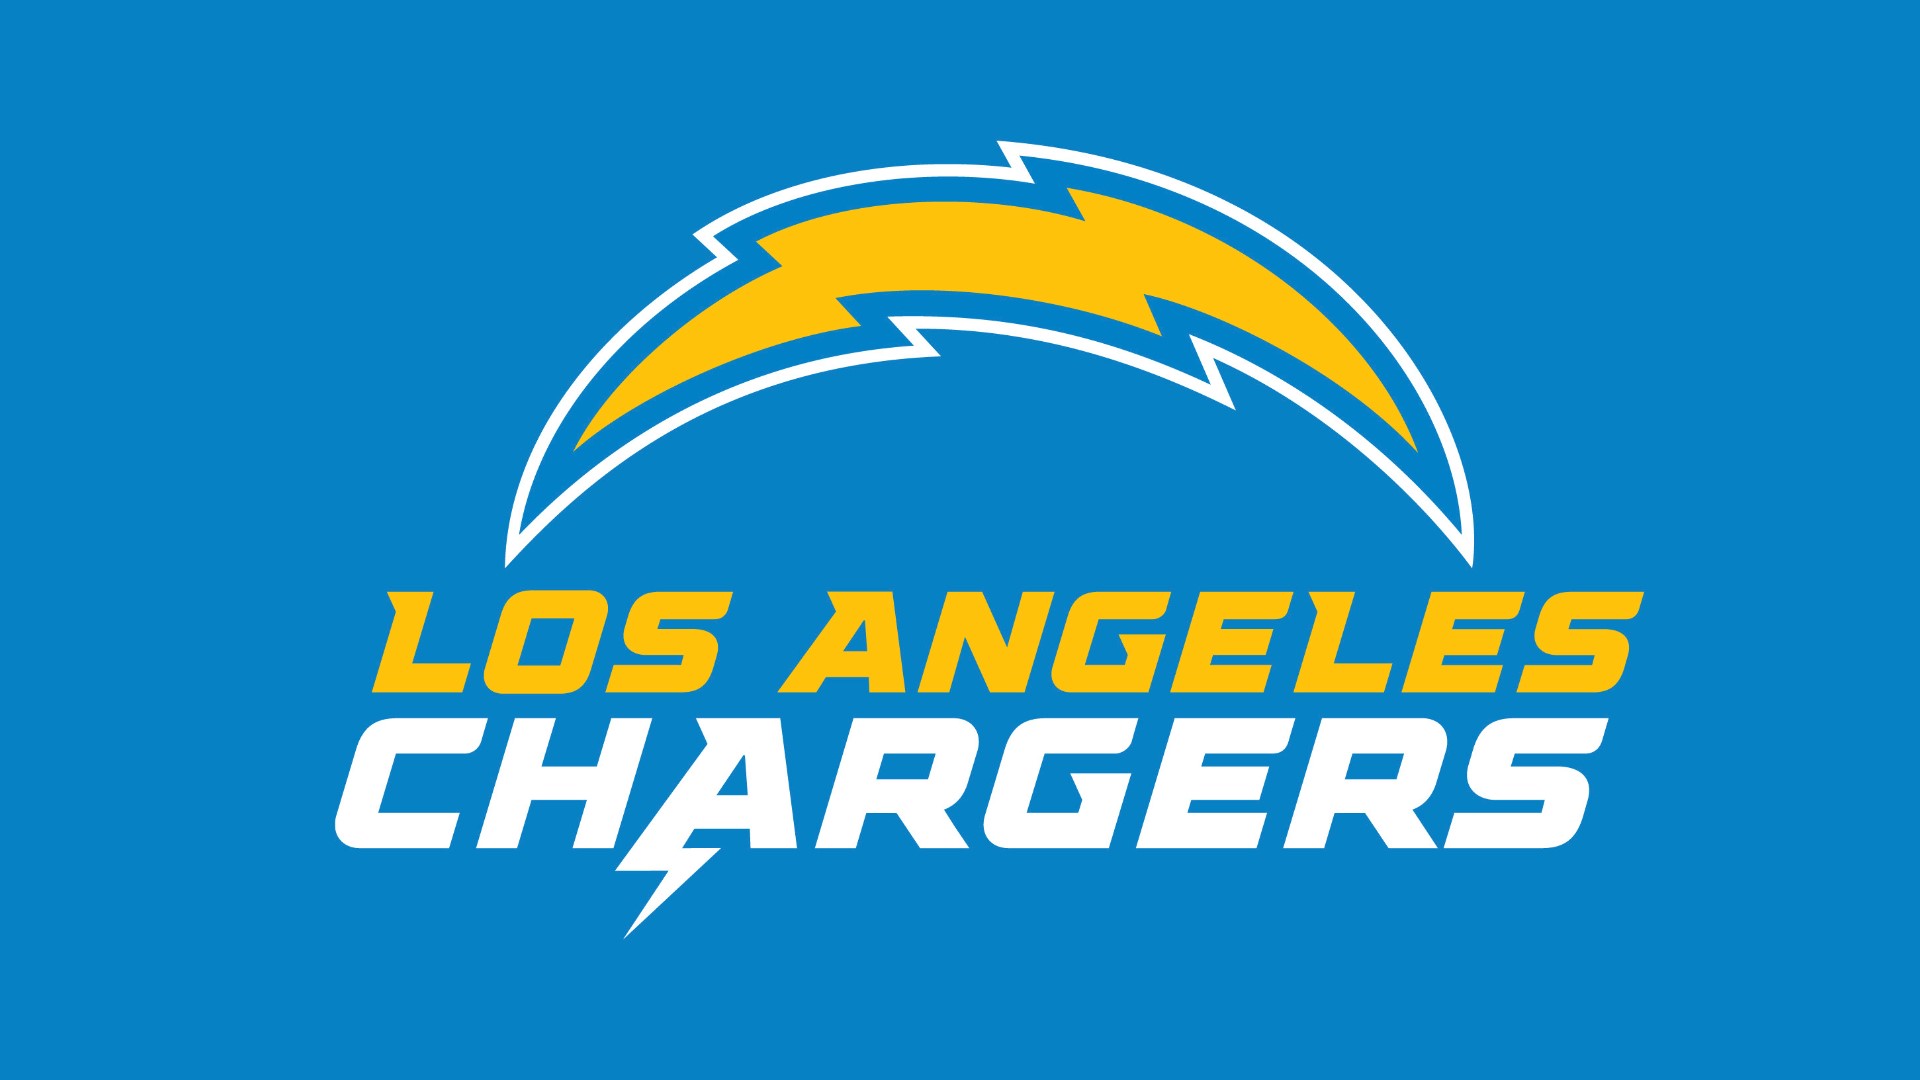 Los Angeles Chargers unveil new logo ahead of 2020 NFL season